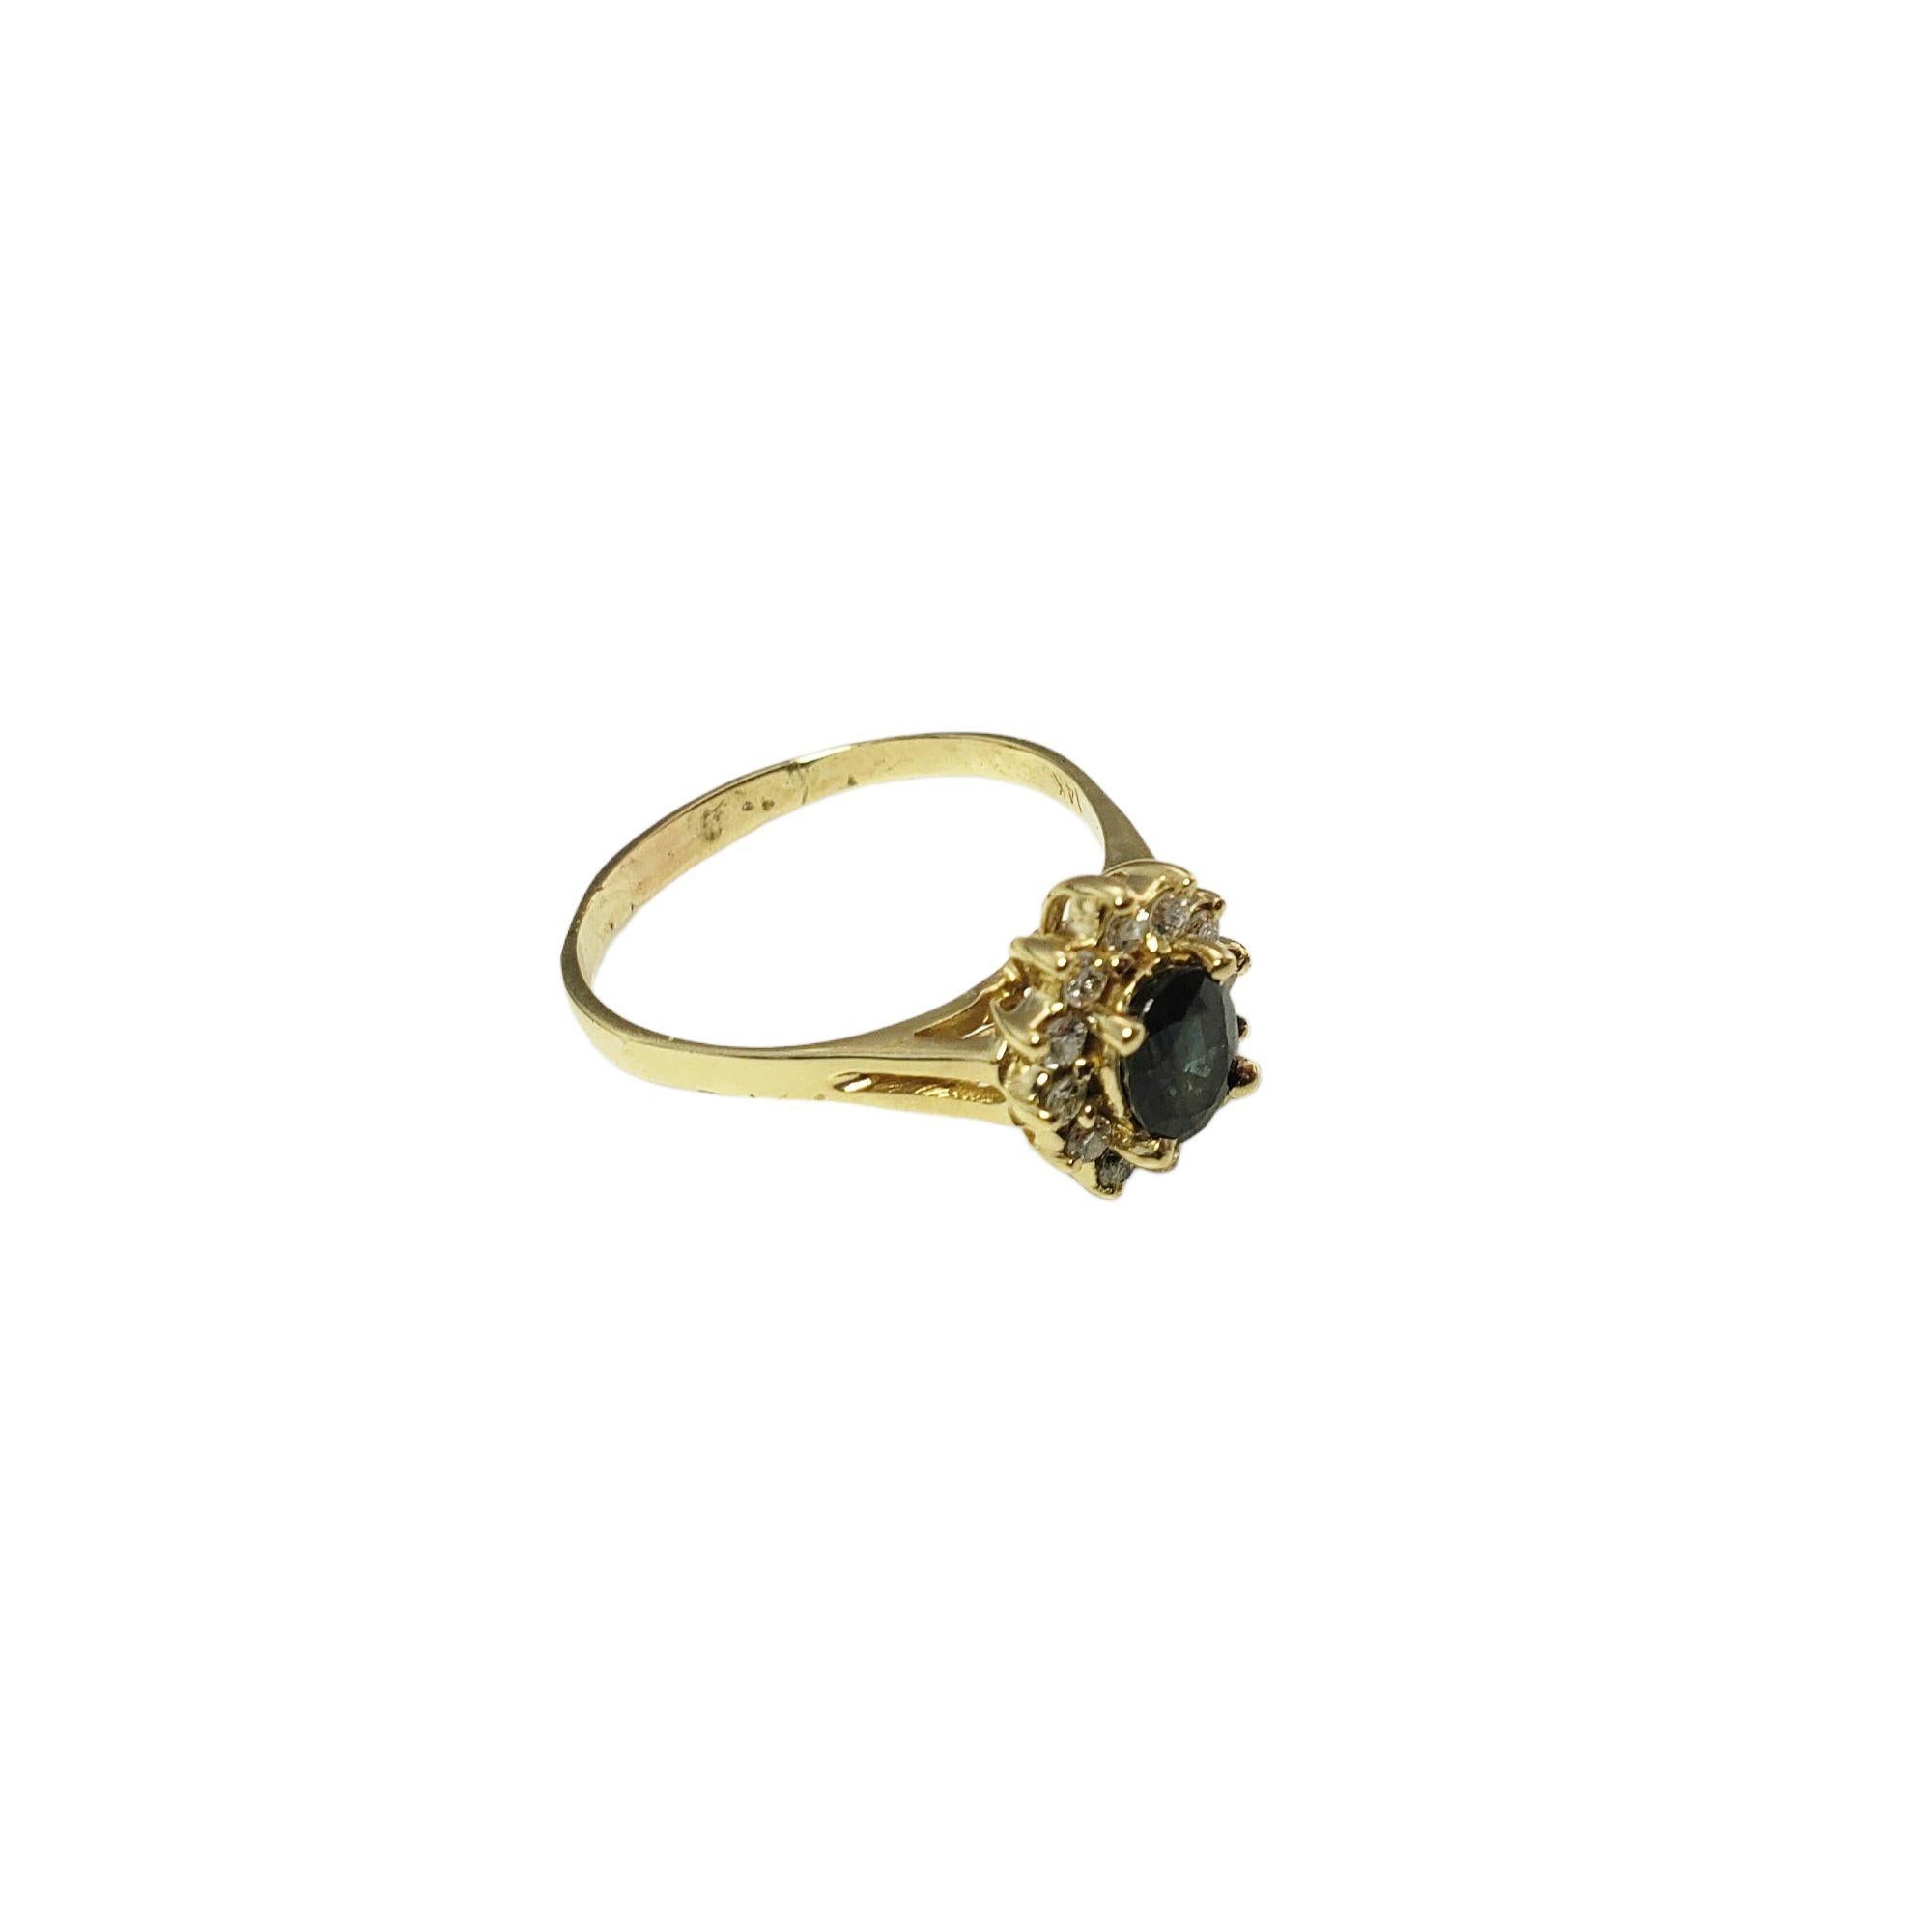 Vintage 14 Karat Yellow Gold Sapphire and Diamond Ring Size 9.5-

This lovely ring features one oval sapphire (7 mm x 5 mm) and 12 round brilliant cut diamonds set in classic 14K yellow gold.
Width: 12 mm. Shank: 2.5 mm.

Approximate total diamond